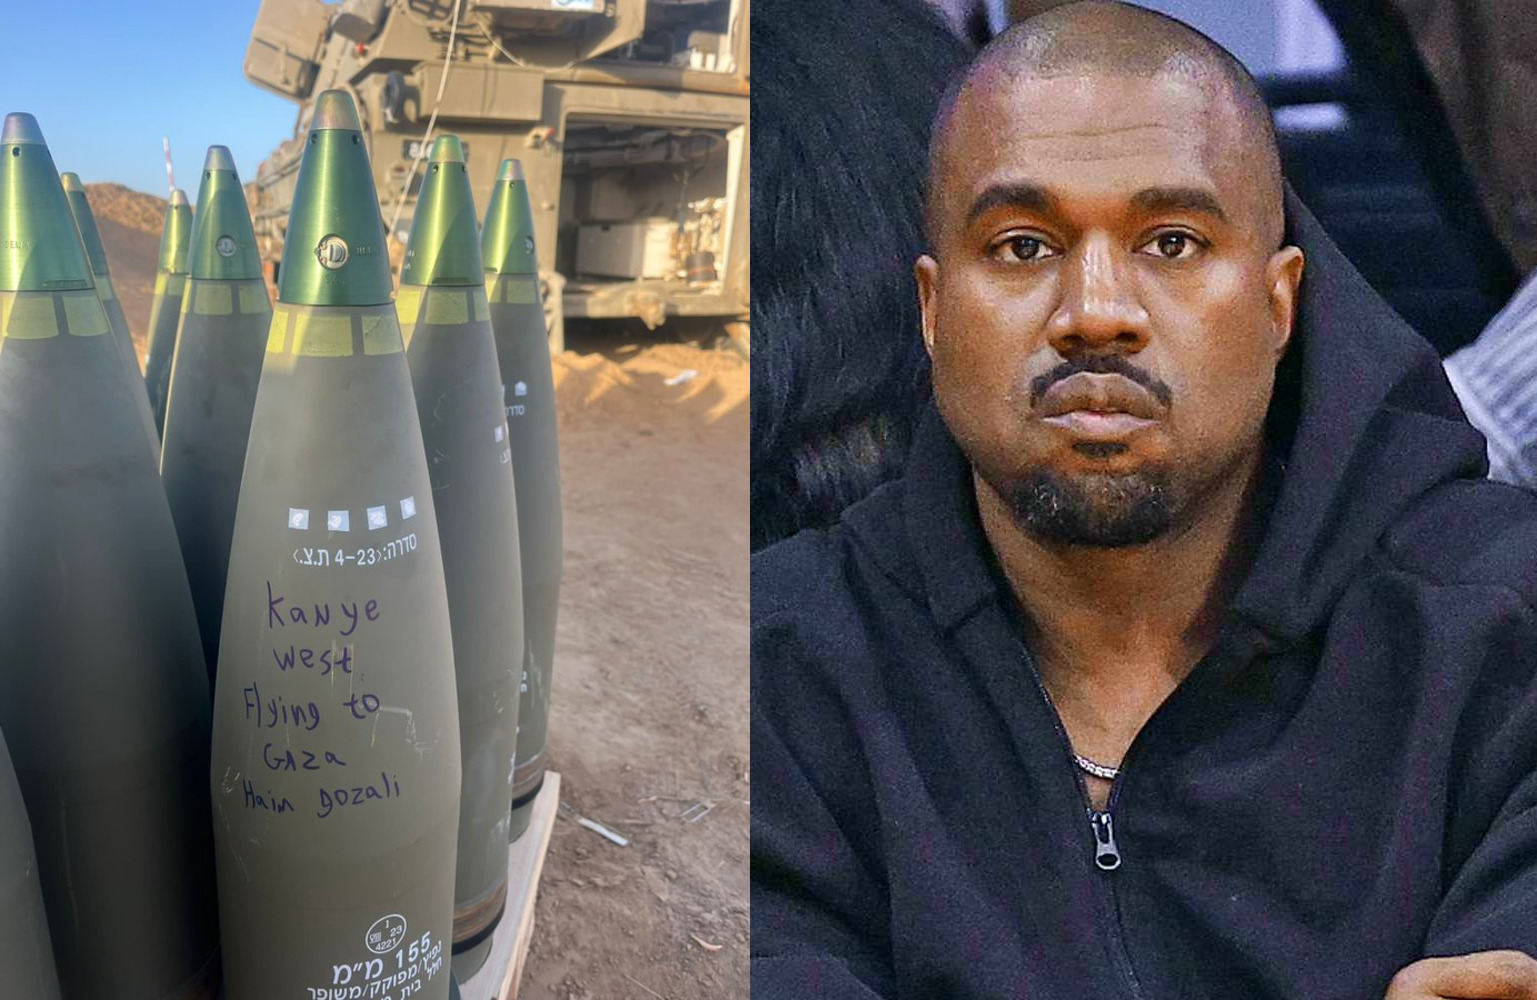 Kanye West apologizes to Jewish community, after his name was written on Israeli missile